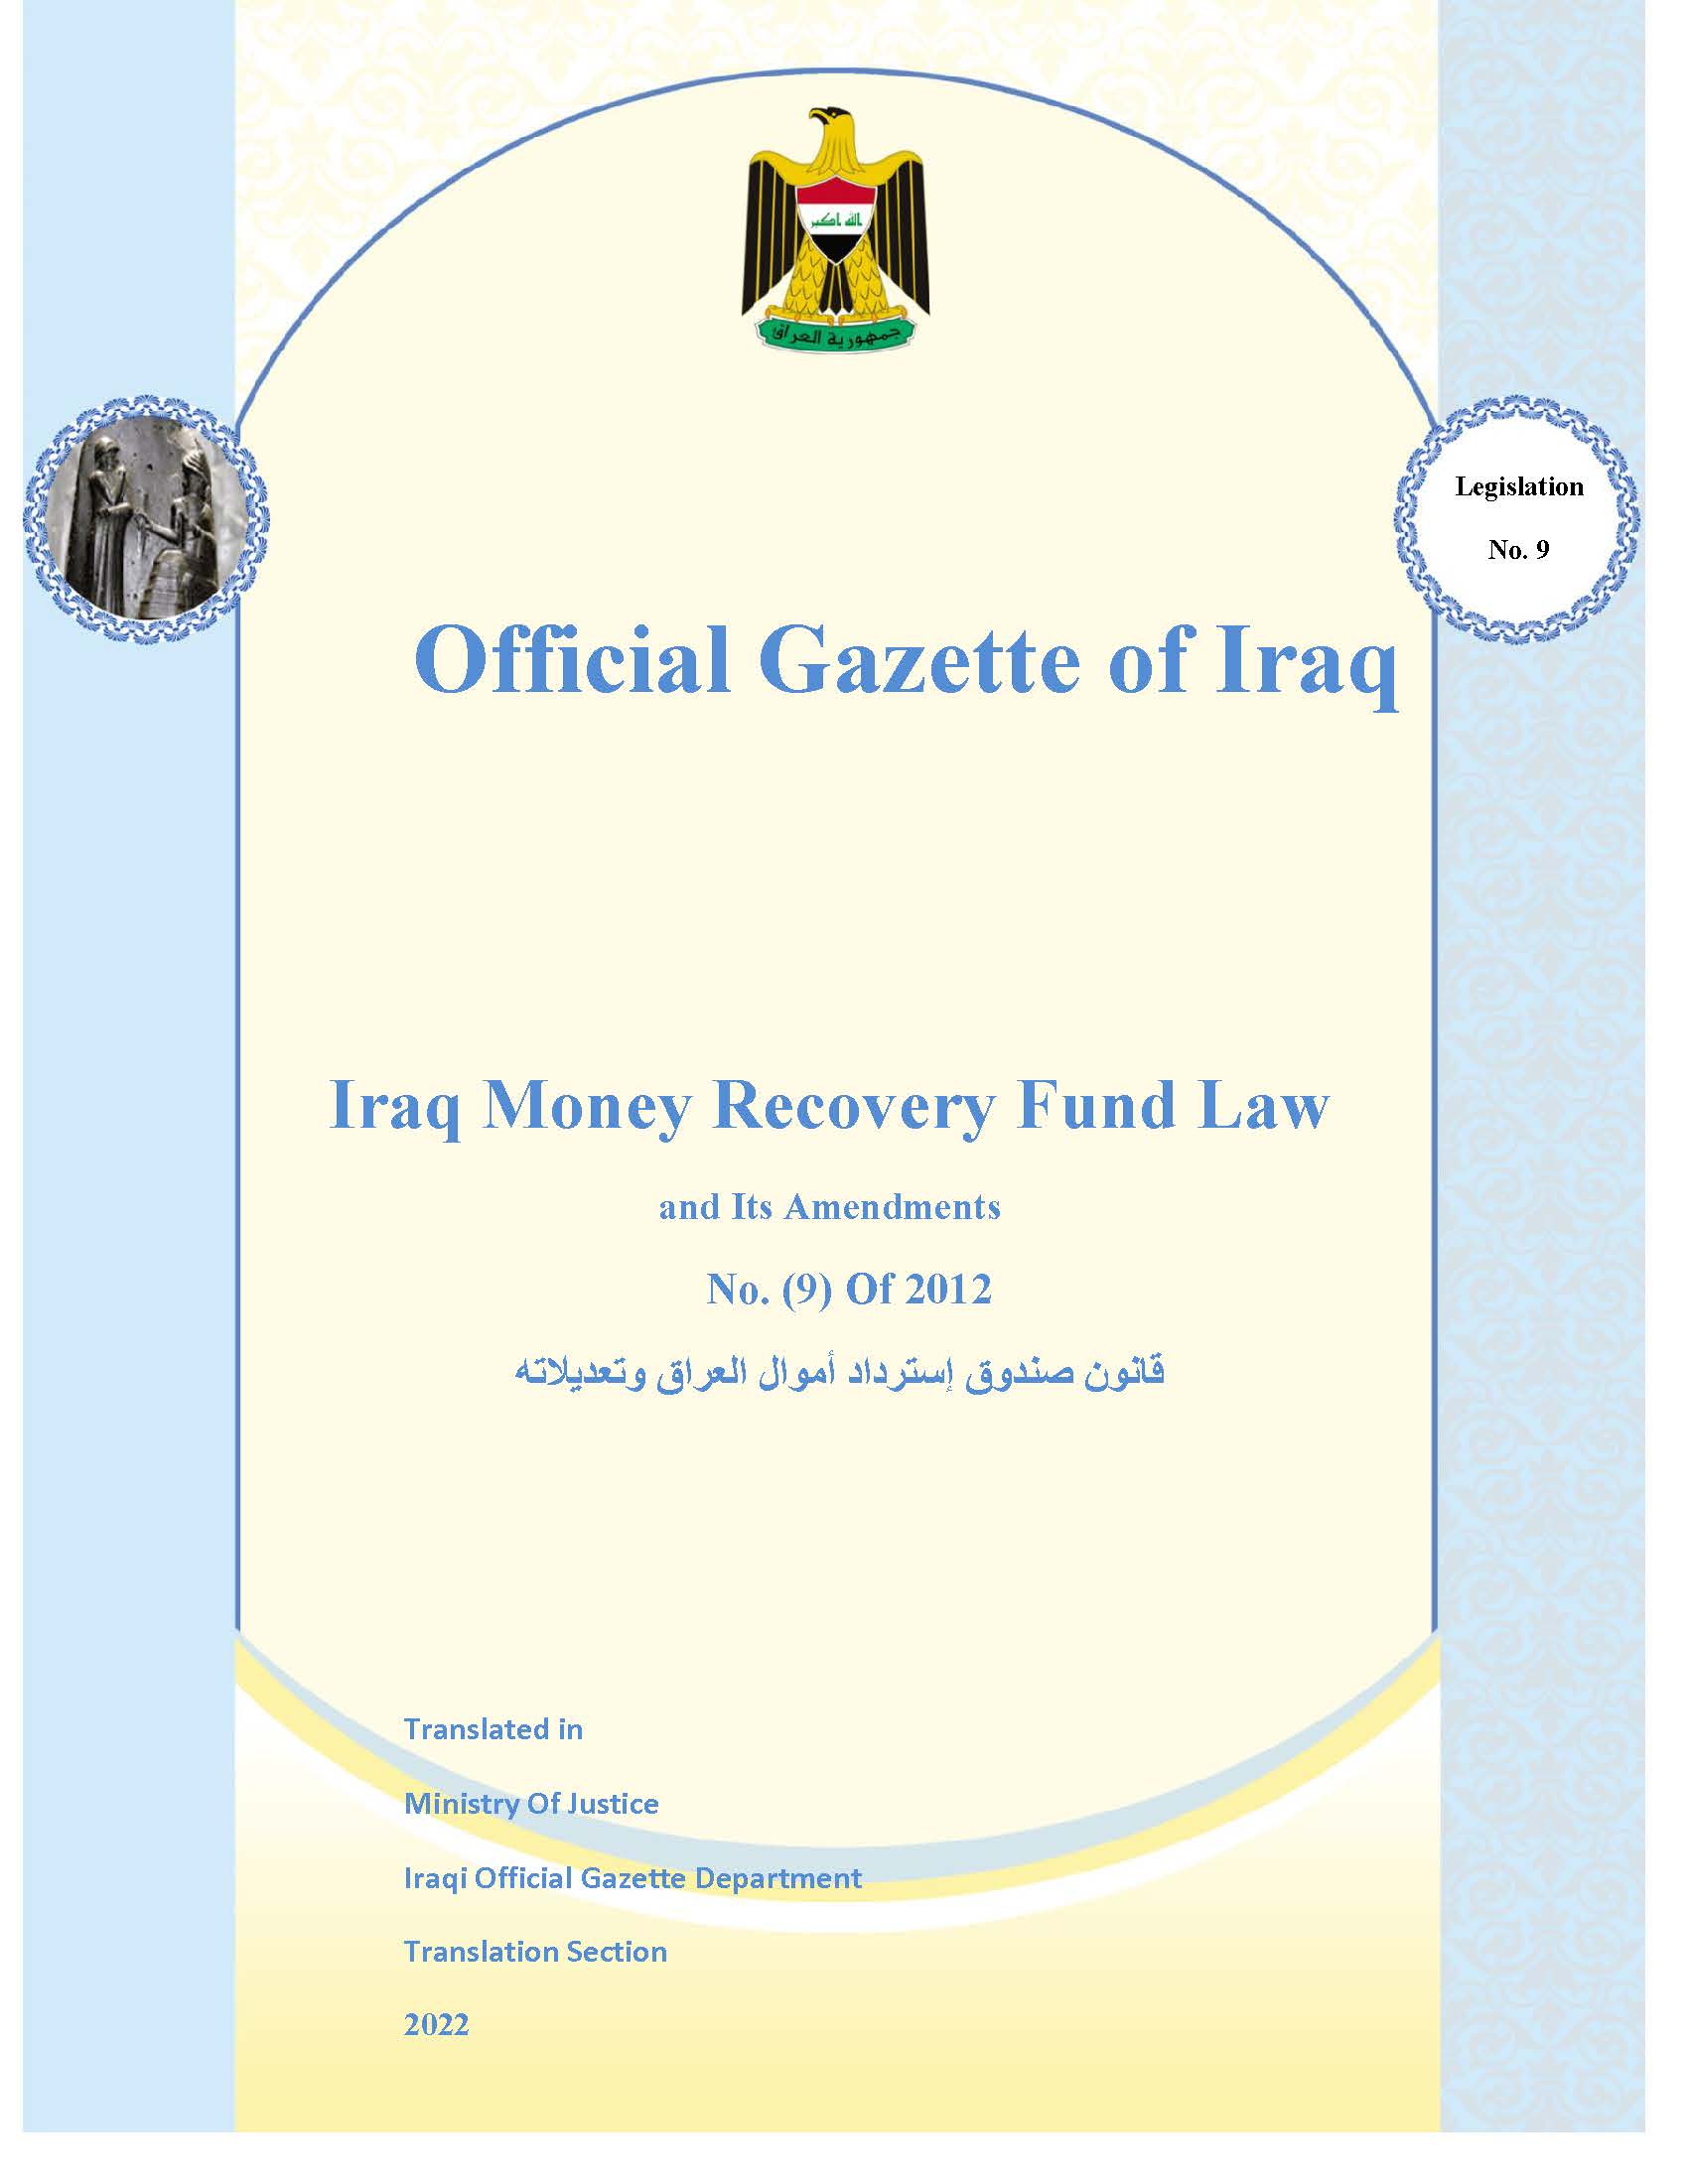 Iraq Money Recovery Fund Law and Its Amendments, No.(9)Of 2012